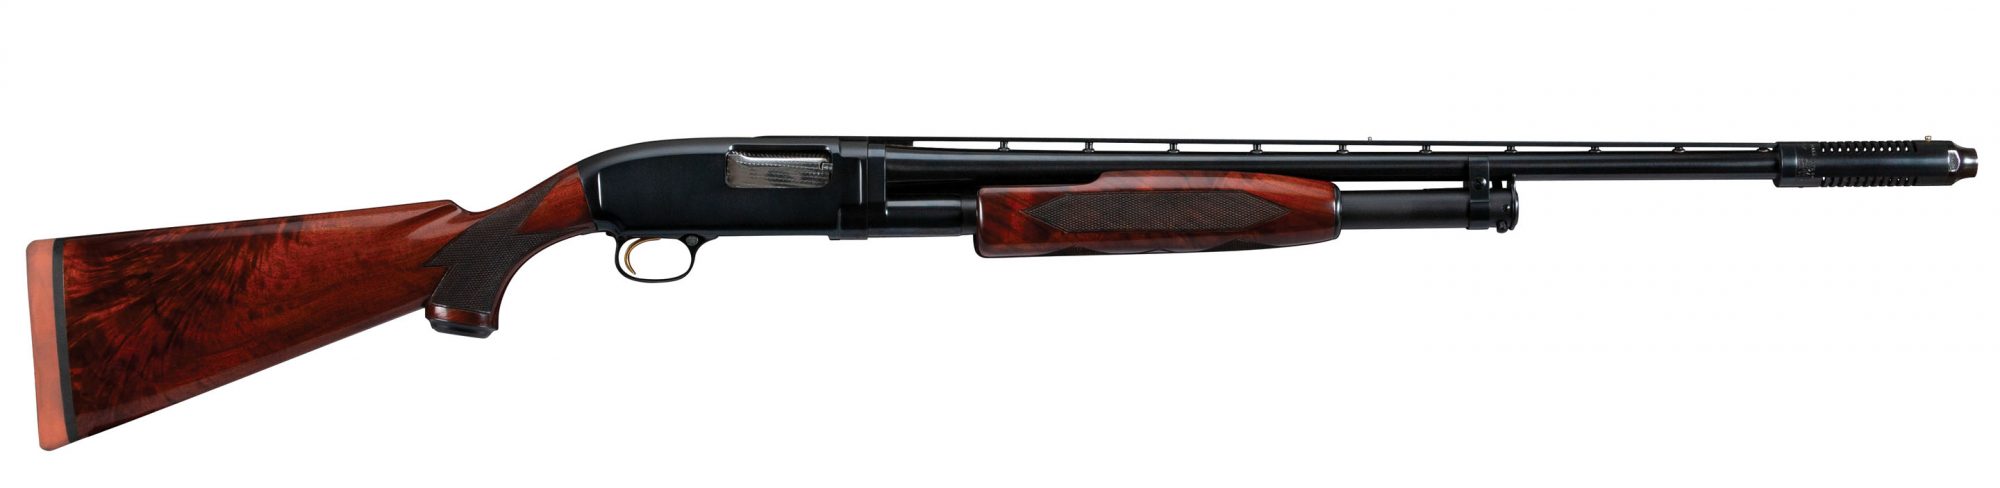 Winchester model 12 dates of manufacture